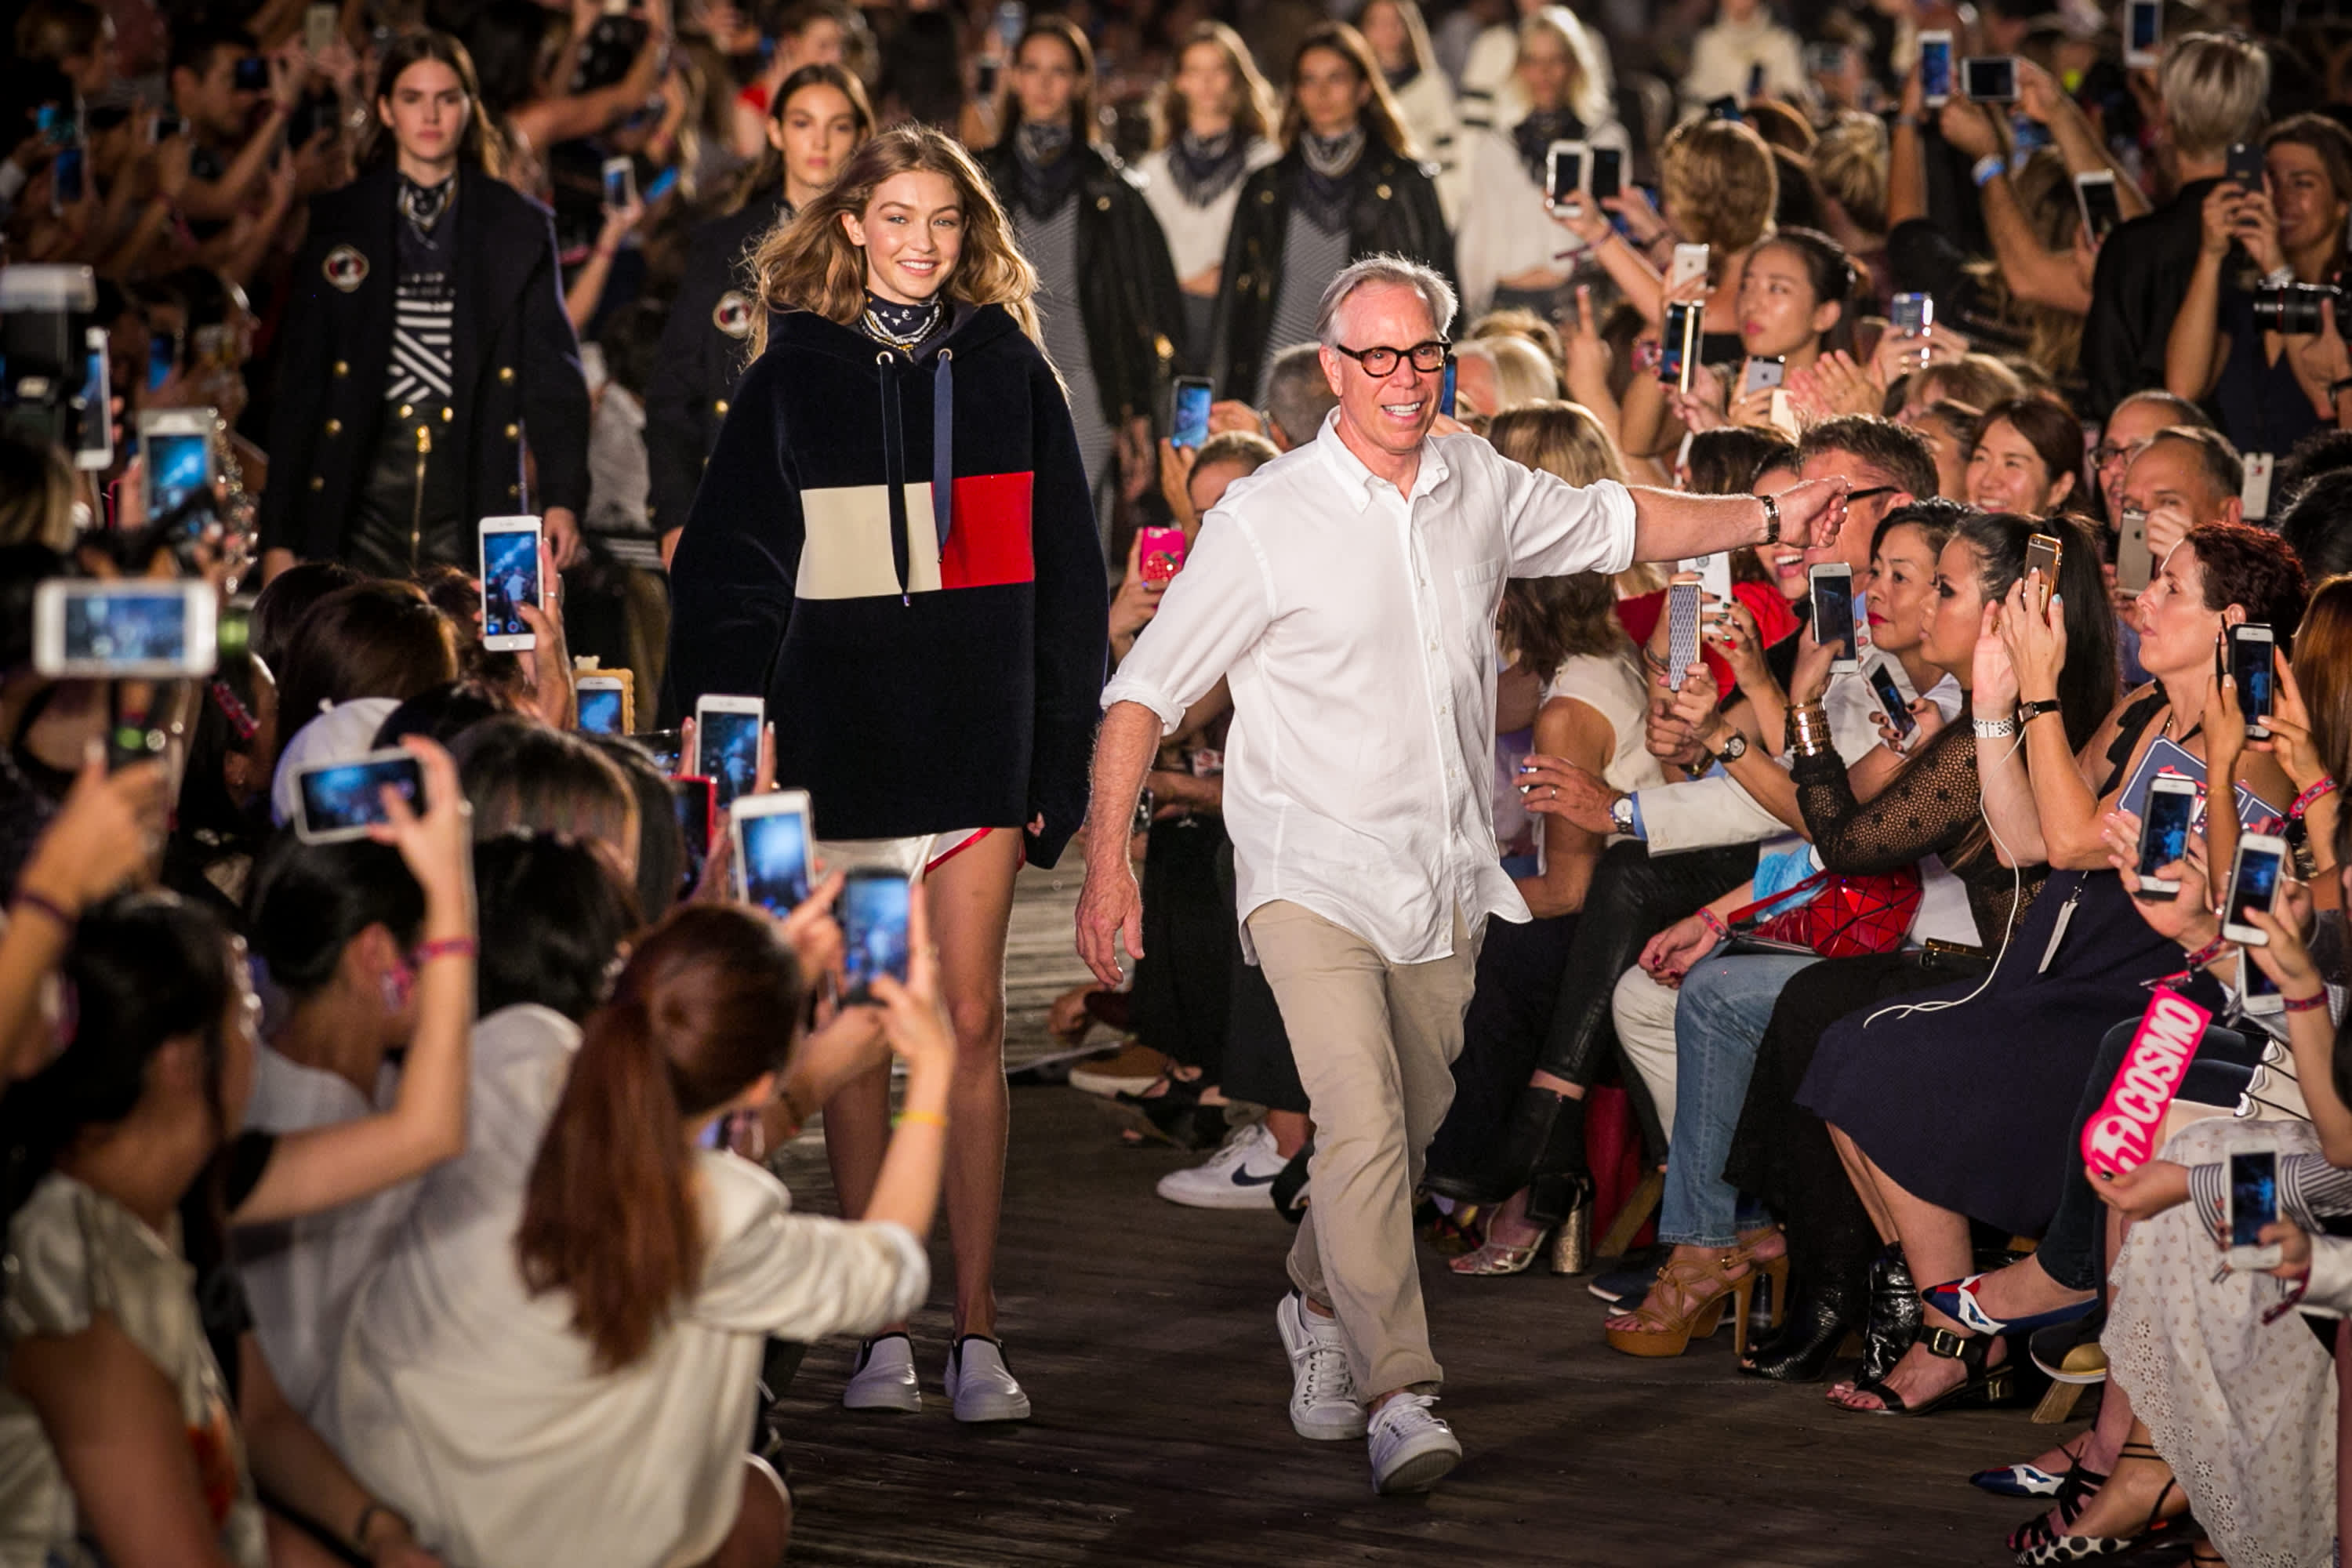 Tommy Hilfiger: Going bankrupt in my 20s taught me more than an MBA